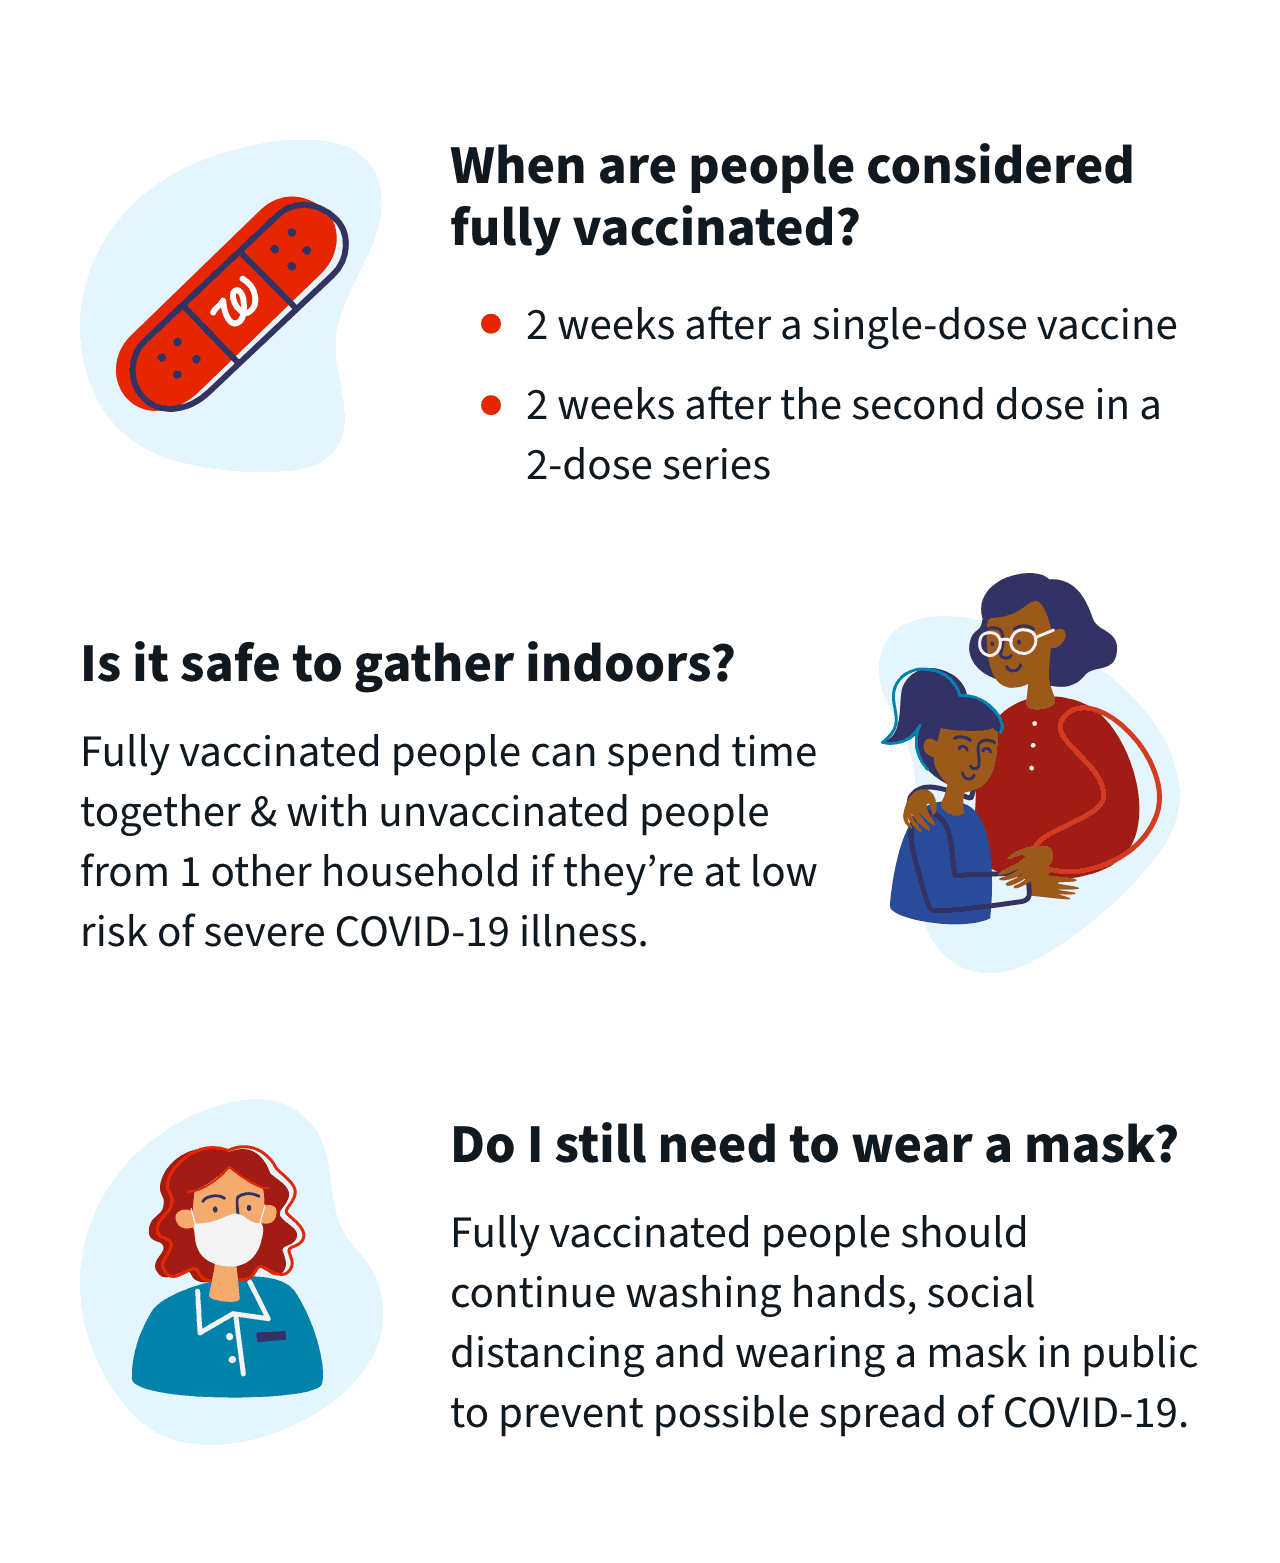 When are people considered fully vaccinated? 2 weeks after a single-dose vaccine. 2 weeks after the second dose in a 2-dose series. Is it safe to gather indoors? Fully vaccinated people can spend time together & with unvaccinated people from 1 other household if they're at low risk of severe COVID-19 illness. Do I still need to wear a mask? Fully vaccinated people should continue washing hands, social distancing and wearing a mask in public to prevent possible spread of COVID-19.